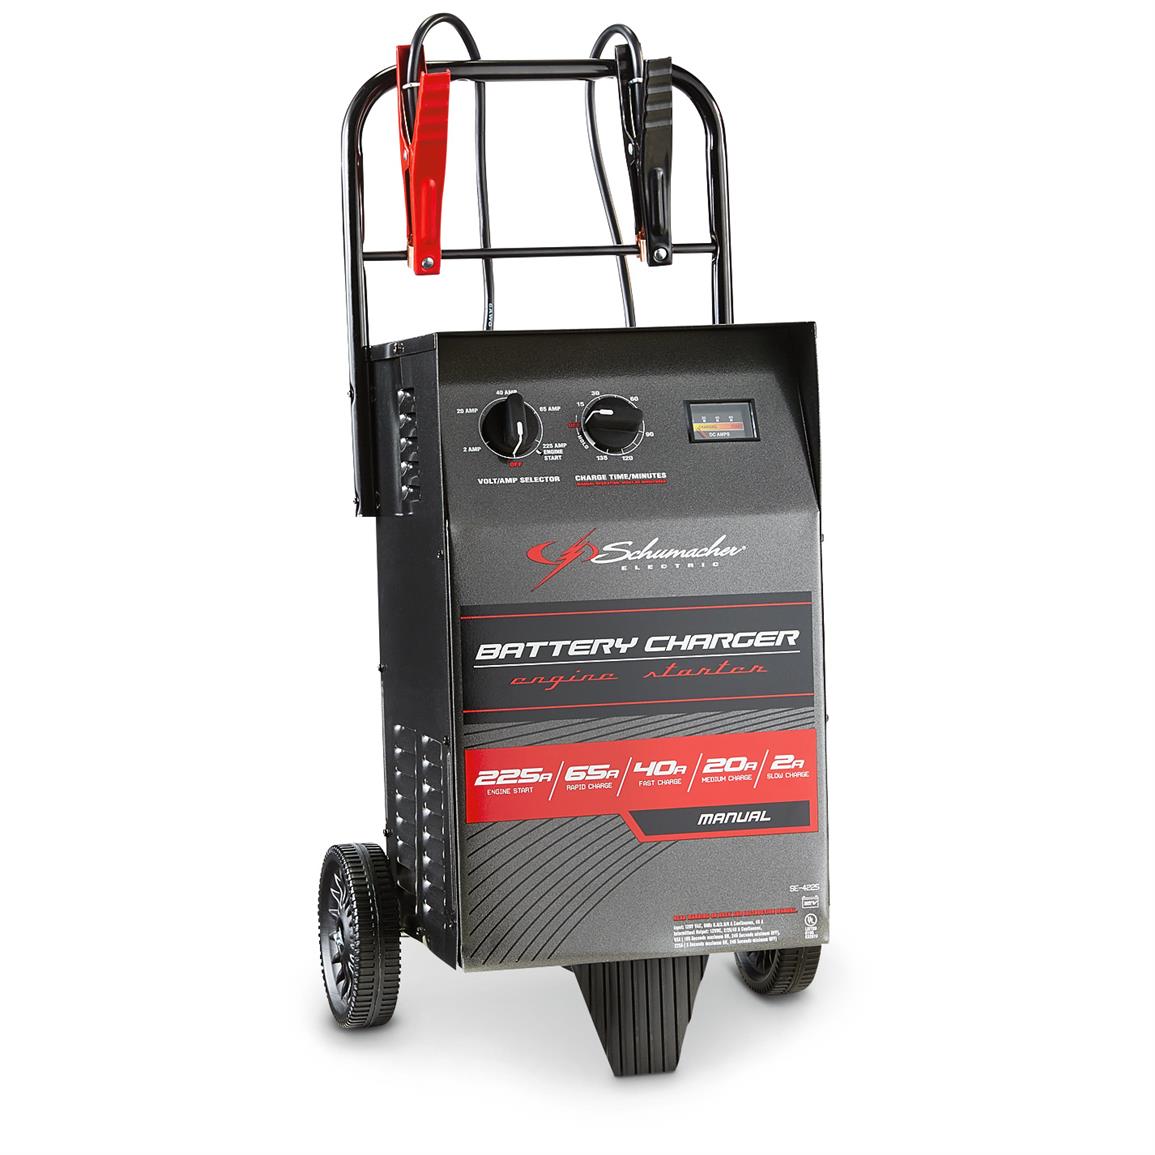 Schumacher 225 Amp Wheeled Electric Battery Charger, SE-4225 - 656099,  Chargers & Jump Starters at Sportsman's Guide